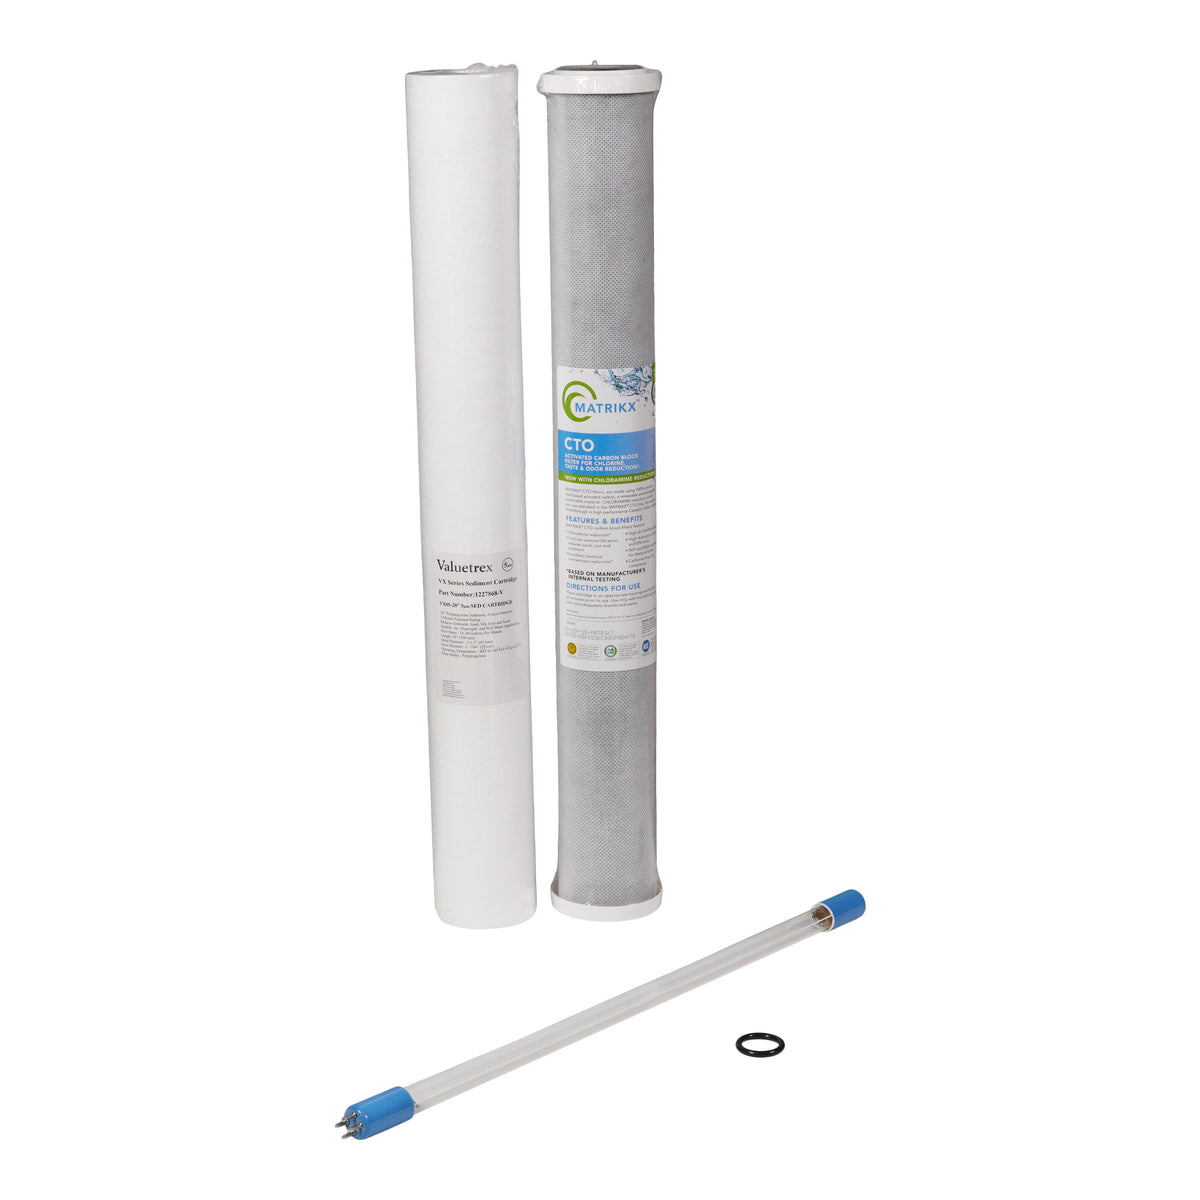 HUM Safe Water 10 Replacement Lamp and Filters Bundle | Free Ship